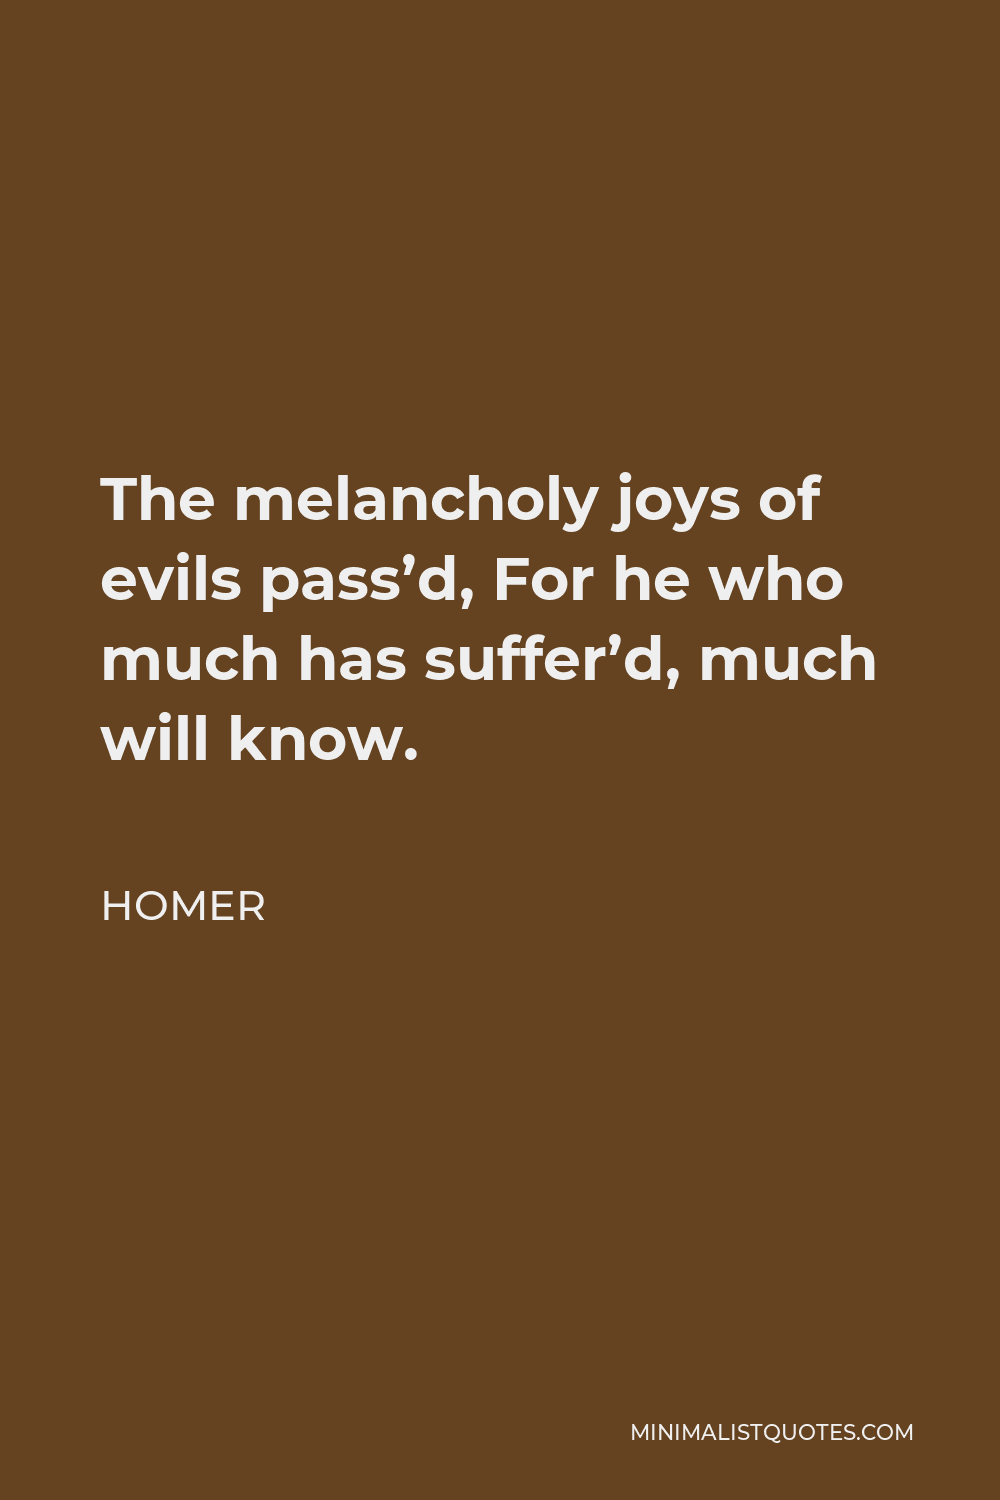 Homer Quote - The melancholy joys of evils pass’d, For he who much has suffer’d, much will know.